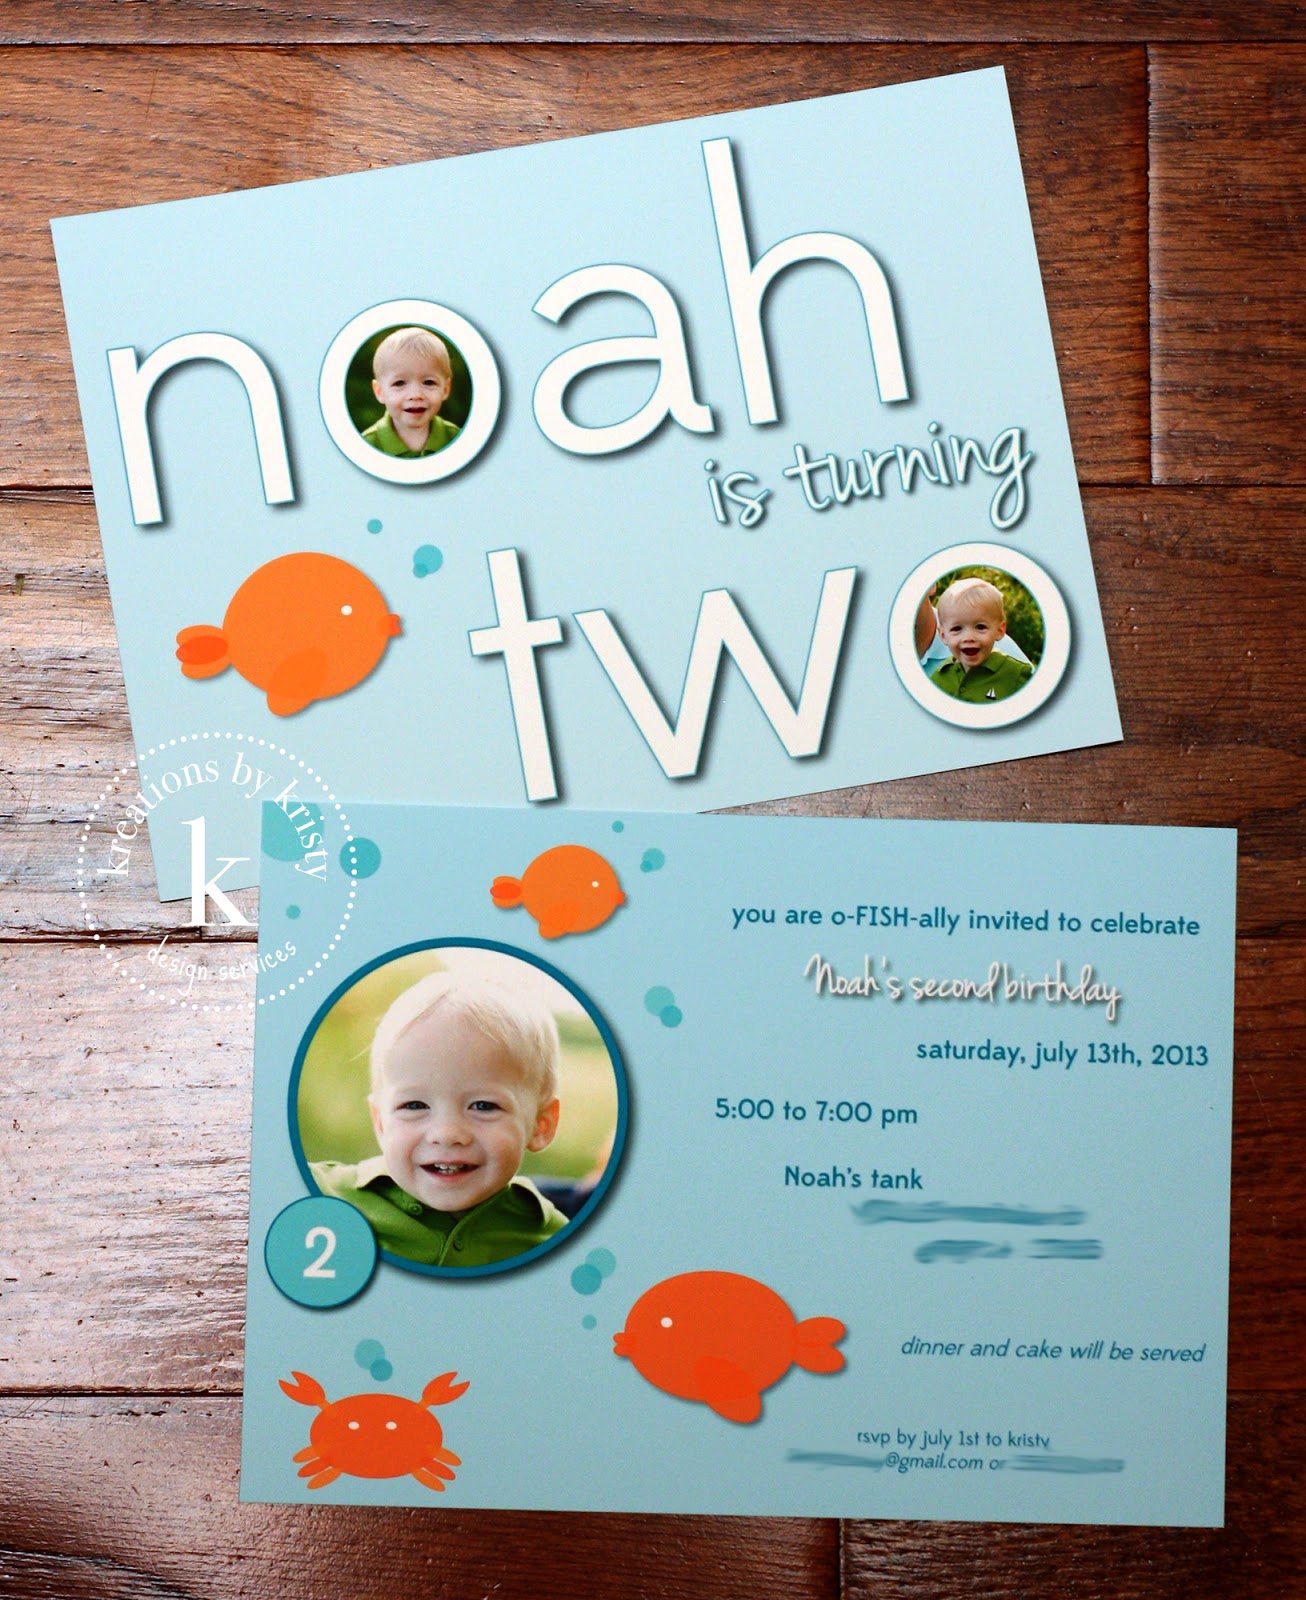 more than 9 to 5my life as Mom: Noah's Fish-Themed Second Birthday